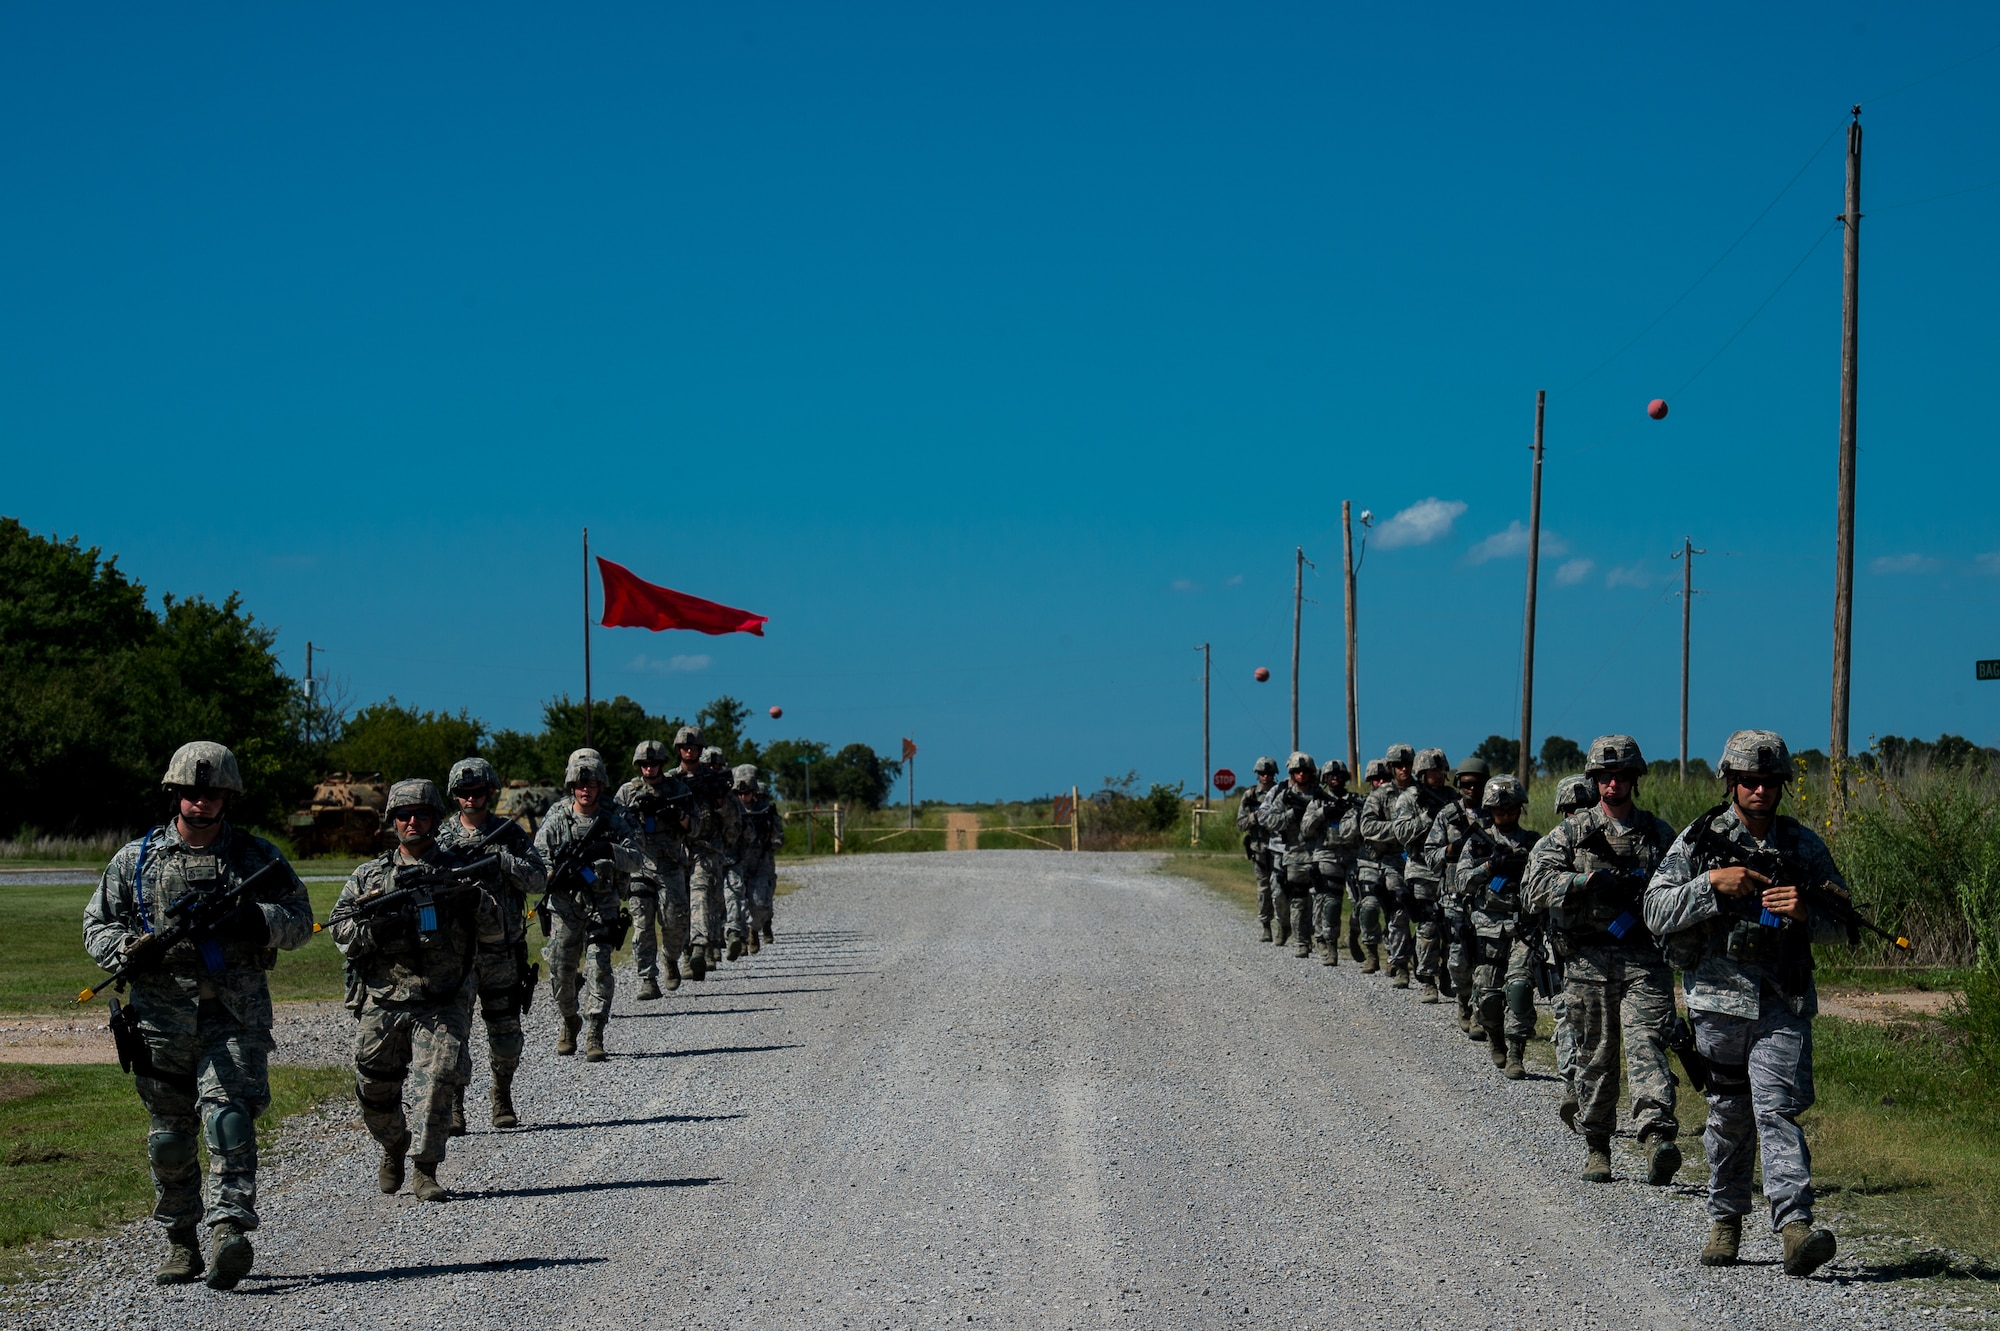 Airmen with the 137th Security Forces Squadron walk in formation at Camp Gruber Training Center near Braggs, Okla., Aug. 3, 2016.  Approximately 40 members of the 137 SFS completed annual training from July 29 to Aug, 5, 2016. Airmen participated in extensive training exercises including close combat, weapons, military operations on urban terrain and navigation. (U.S. Air National Guard photo by Senior Airman Tyler Woodward/Released)